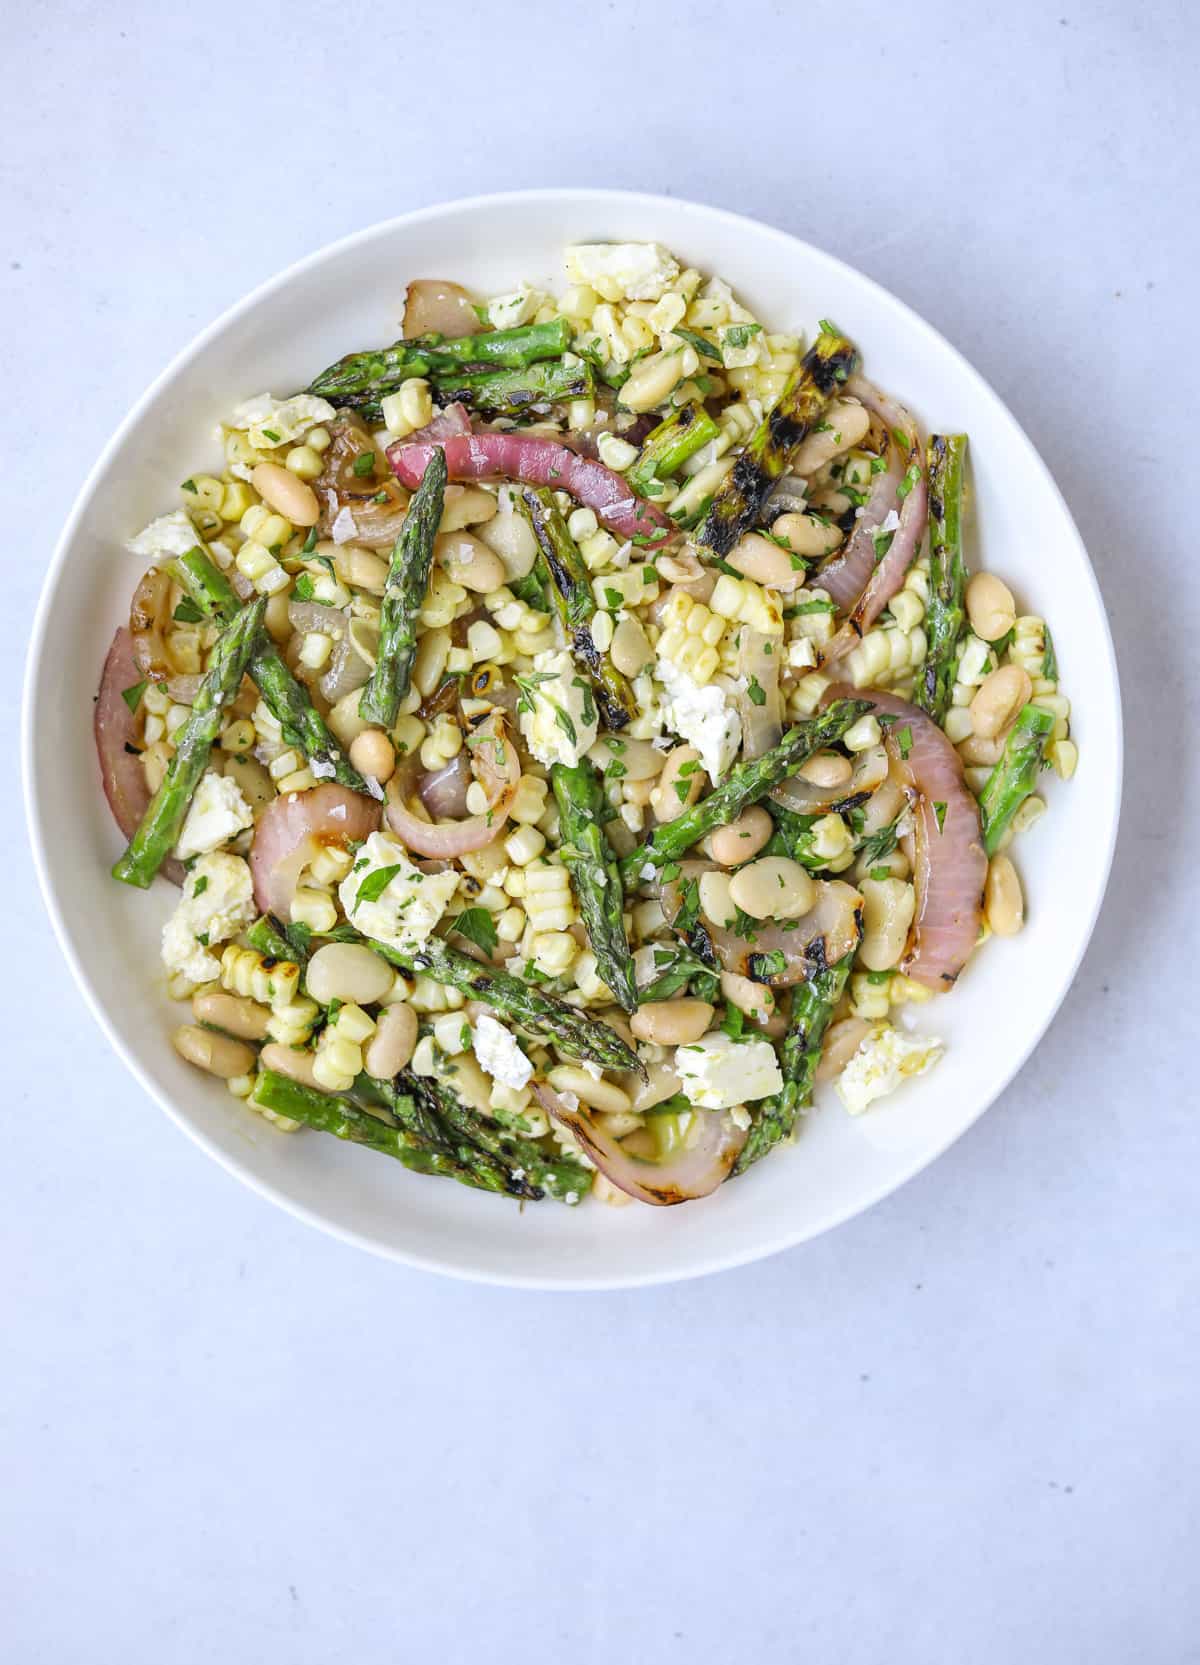 a white bowl filled with grilled vegetable salad with white beans, get feta cheese, asparagus, red onion, on a blue background